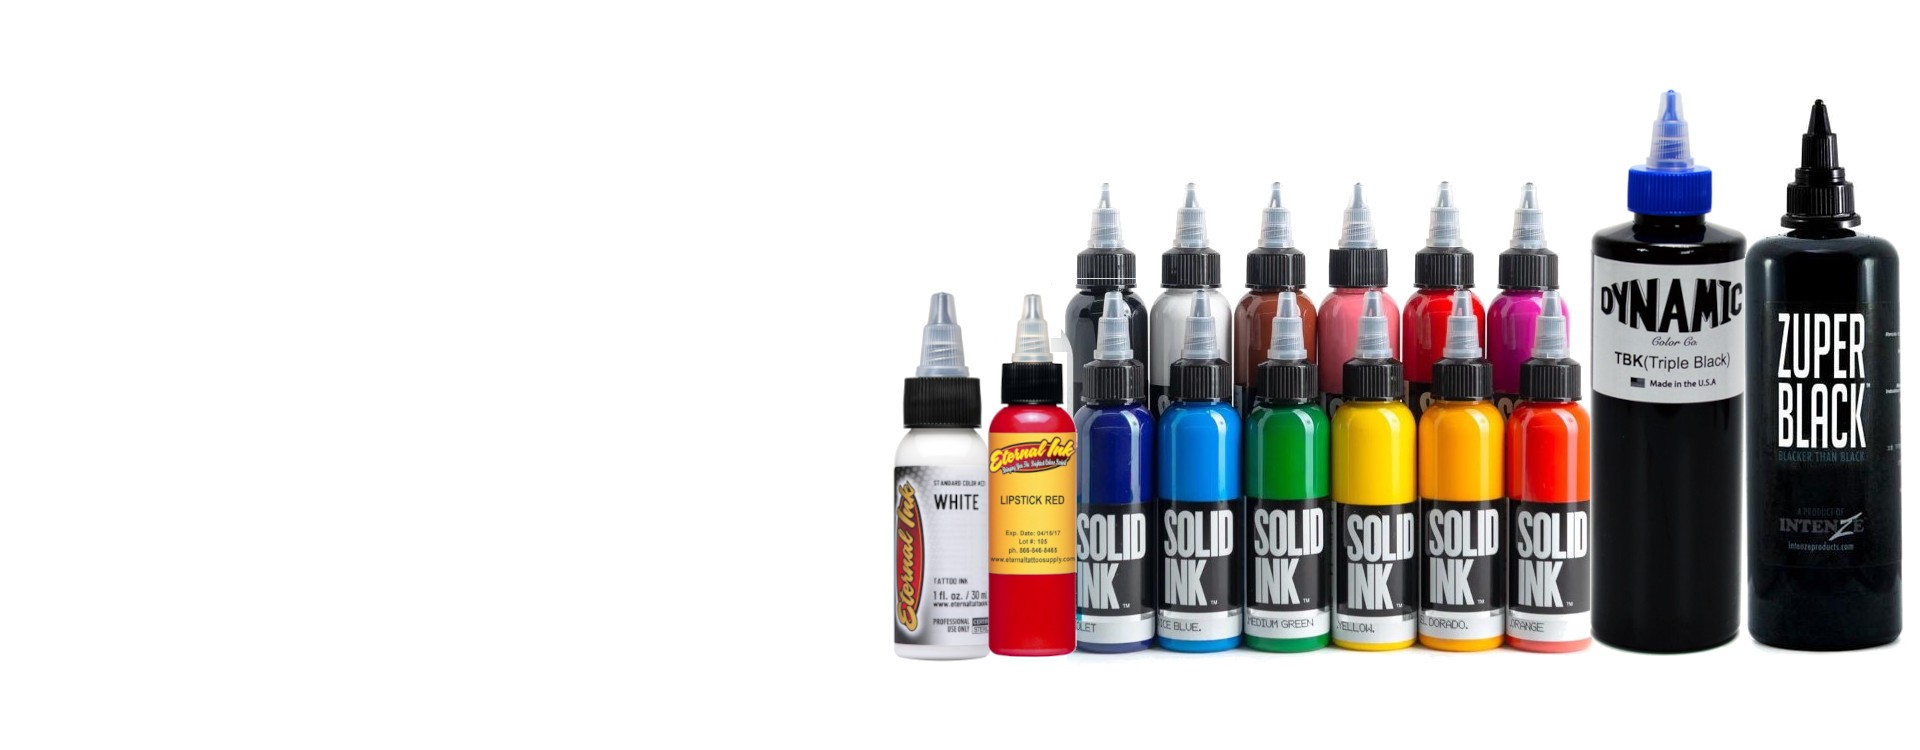 Top 5 Tattoo Ink Brands Made in the US  Monster Steel